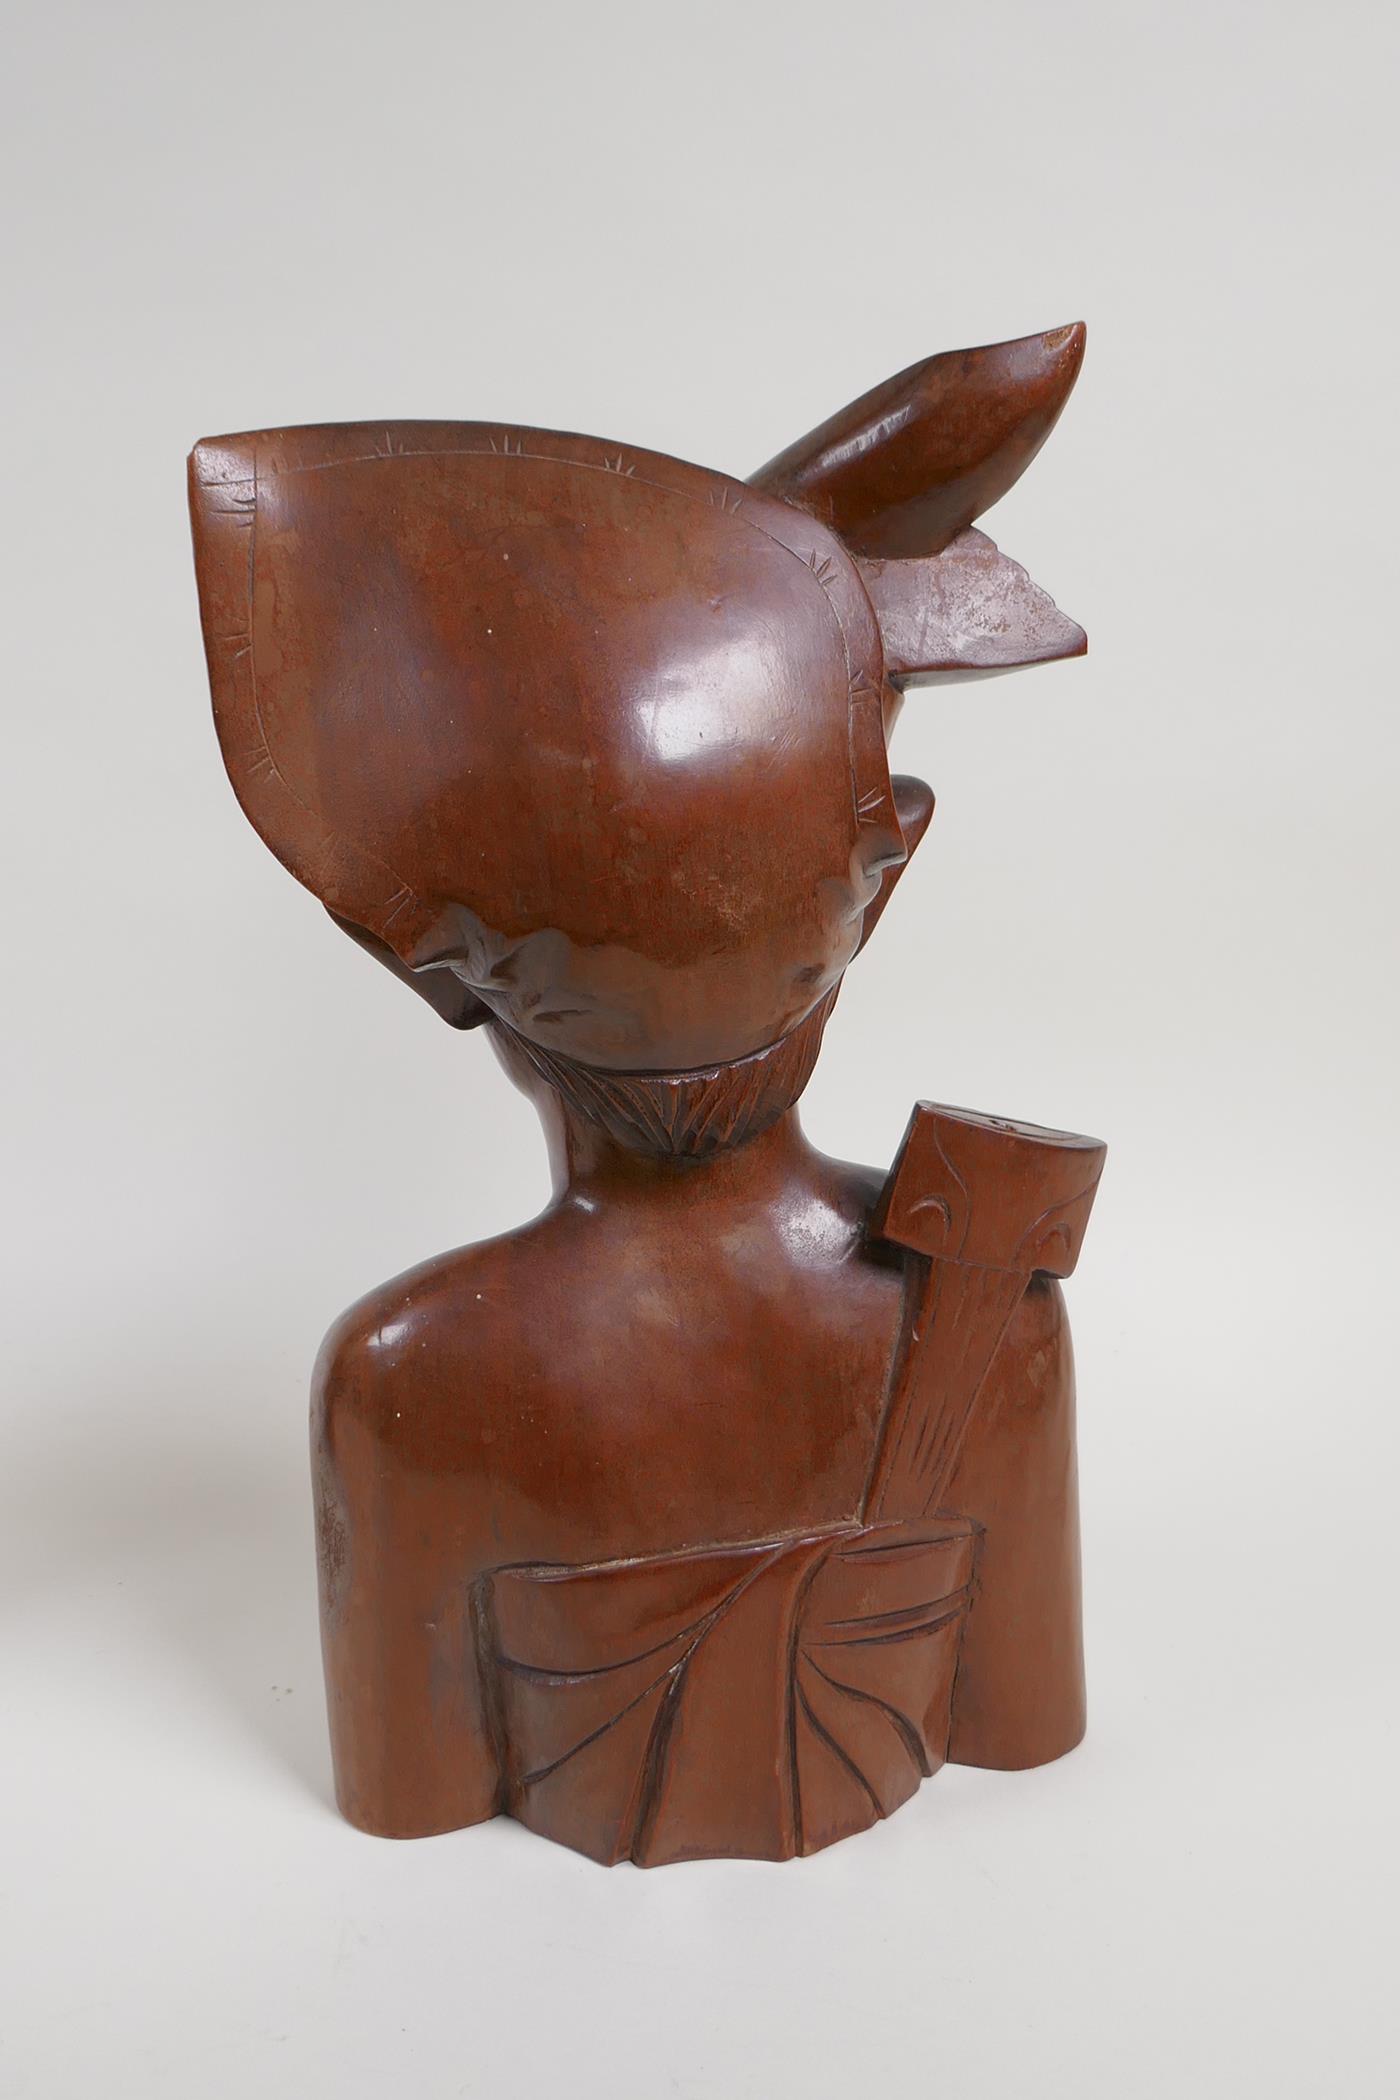 A Japanese hardwood carving of a fisherman, and a Balinese hardwood carving of a man in - Image 5 of 6